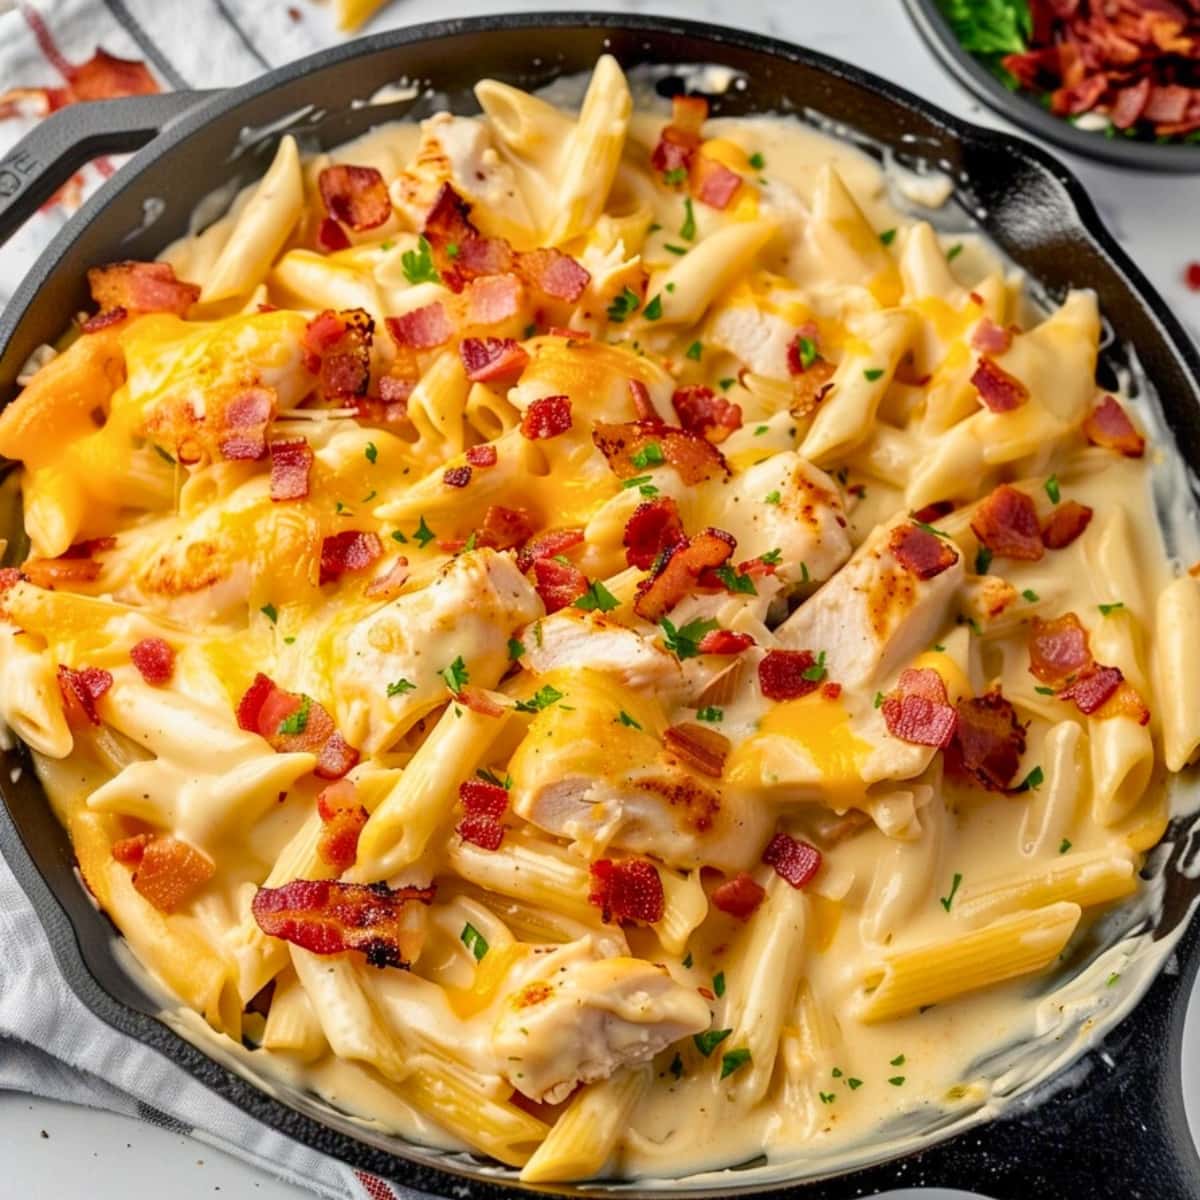 Cheesy and saucy crack chicken penne pasta in a cast iron skillet.